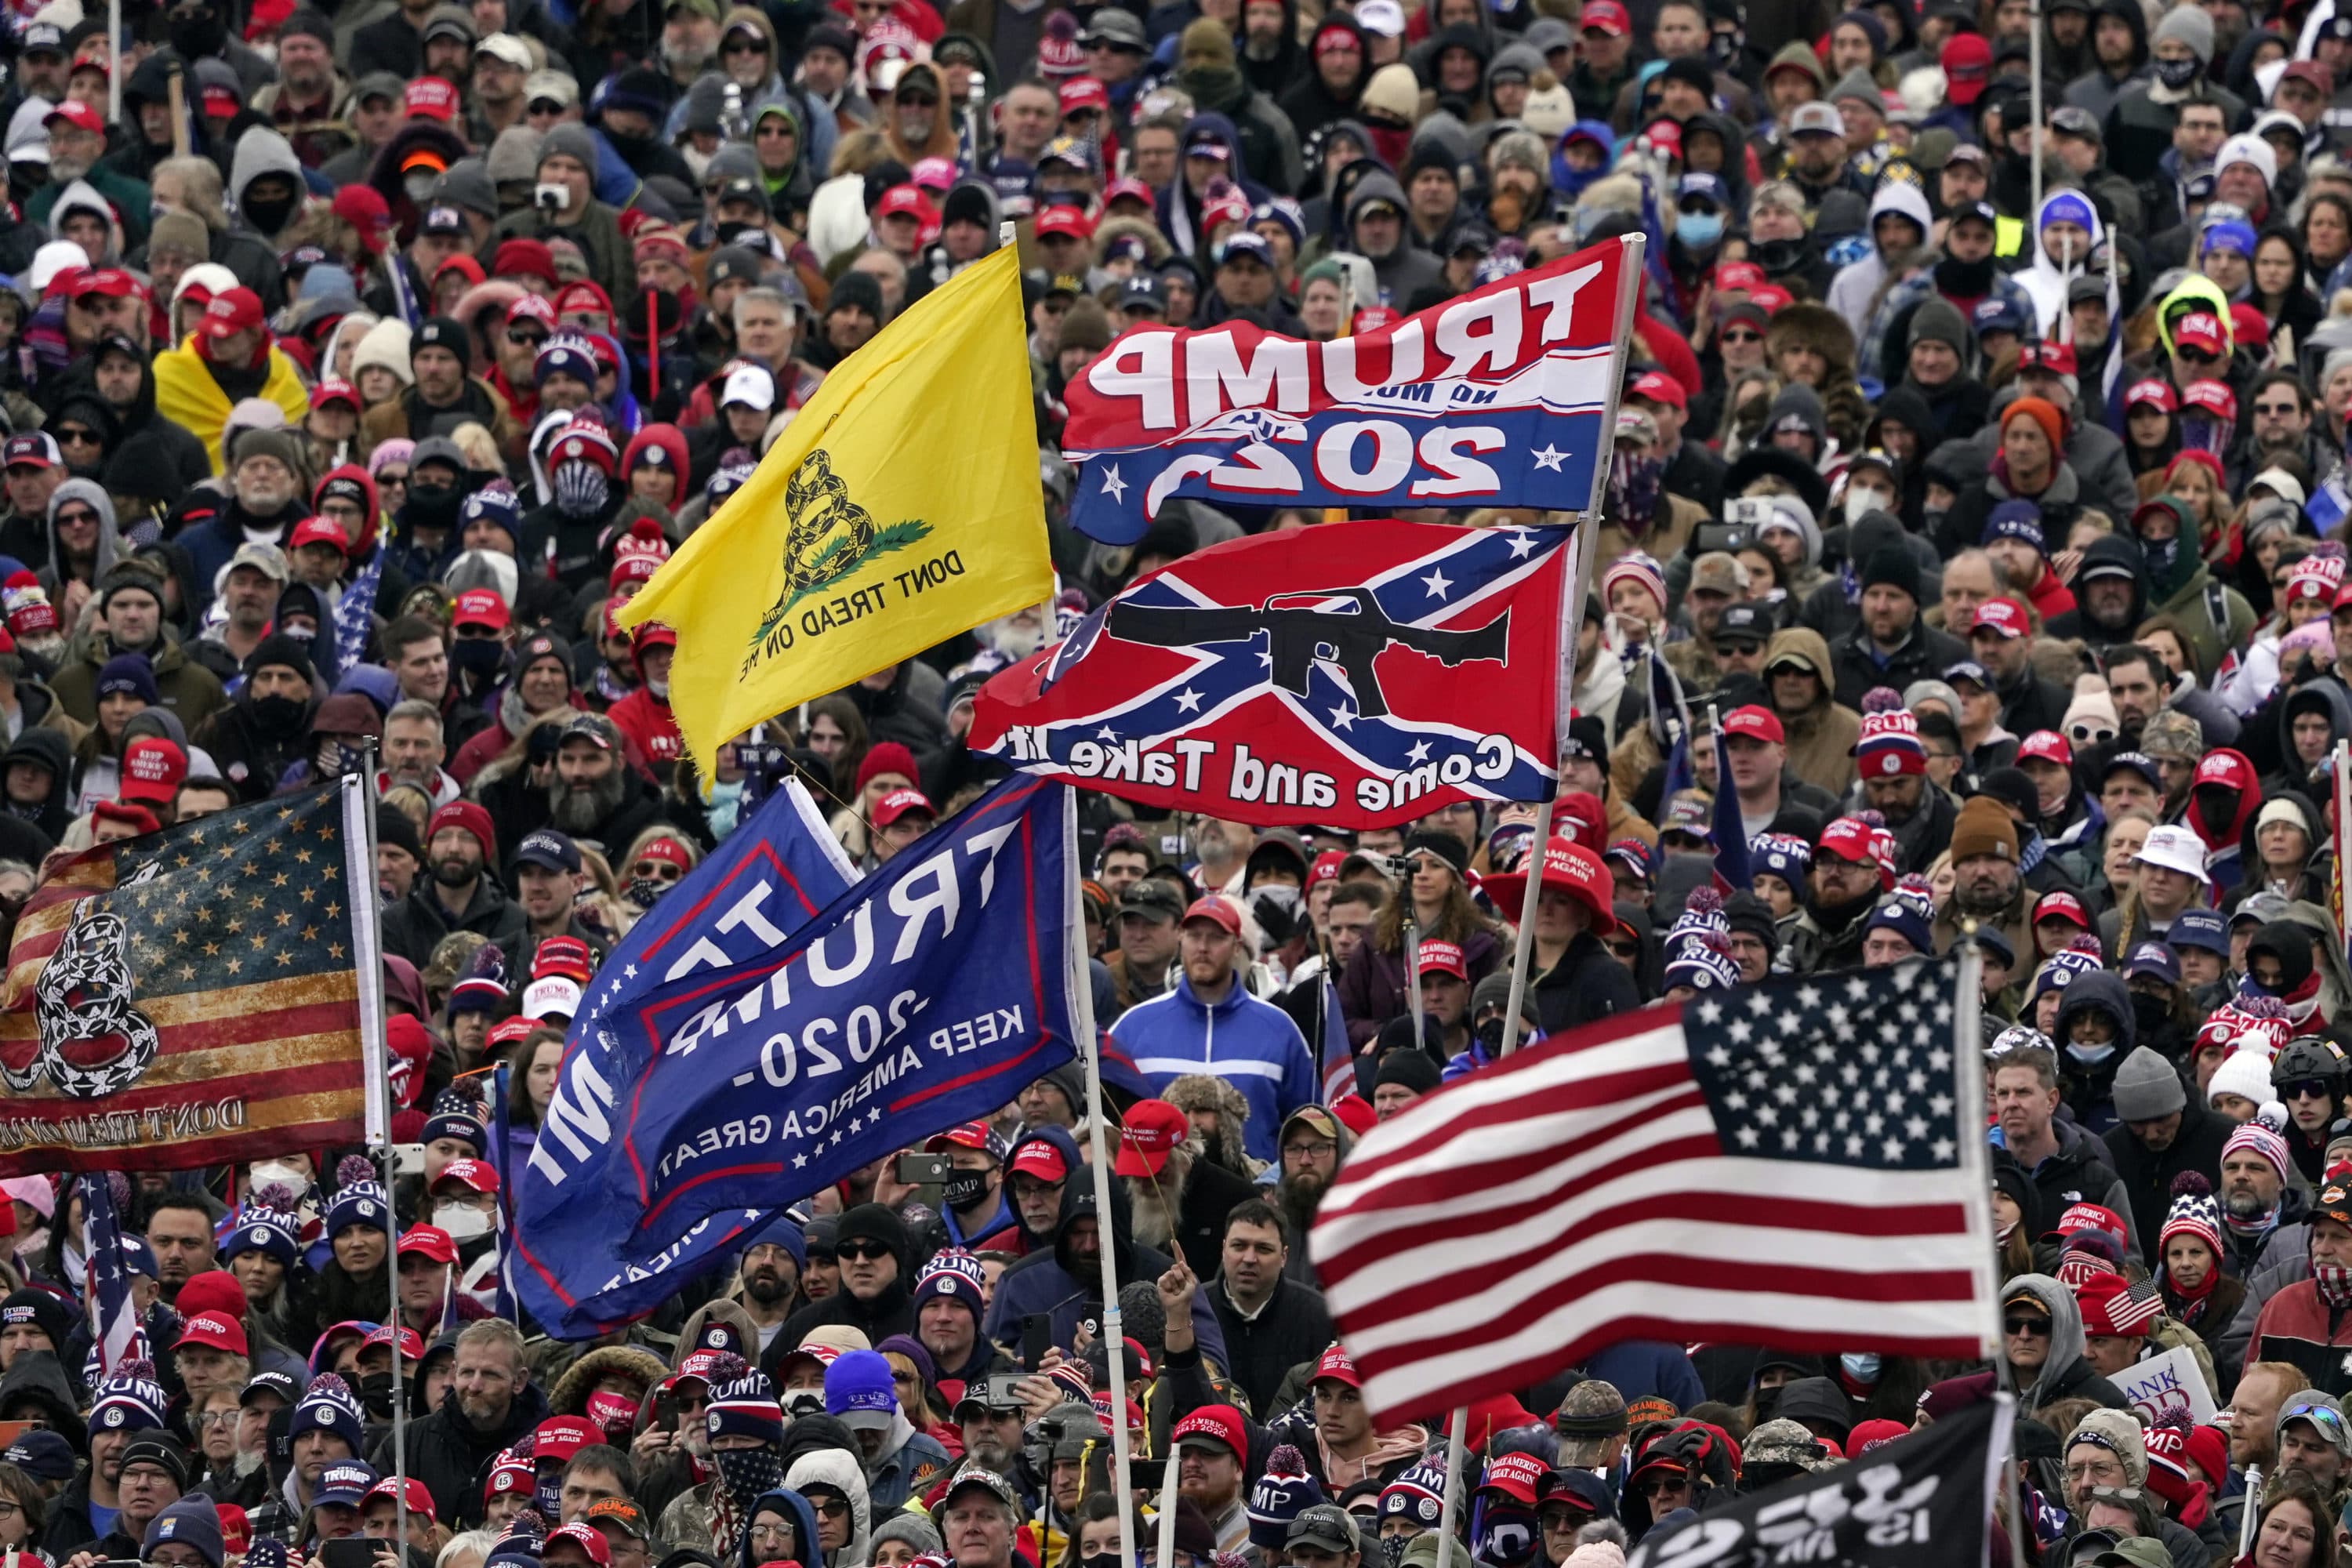 In this Jan. 6, 2021 photo, supporters listen as President Donald Trump speaks as a Confederate-themed and other flags flutter in the wind during a rally in Washington. War-like imagery has begun to take hold in mainstream Republican political circles in the wake of the deadly attack on the U.S. Capitol, with some elected officials and party leaders rejecting calls to tone down their rhetoric contemplating a second civil war. (Evan Vucci/AP)